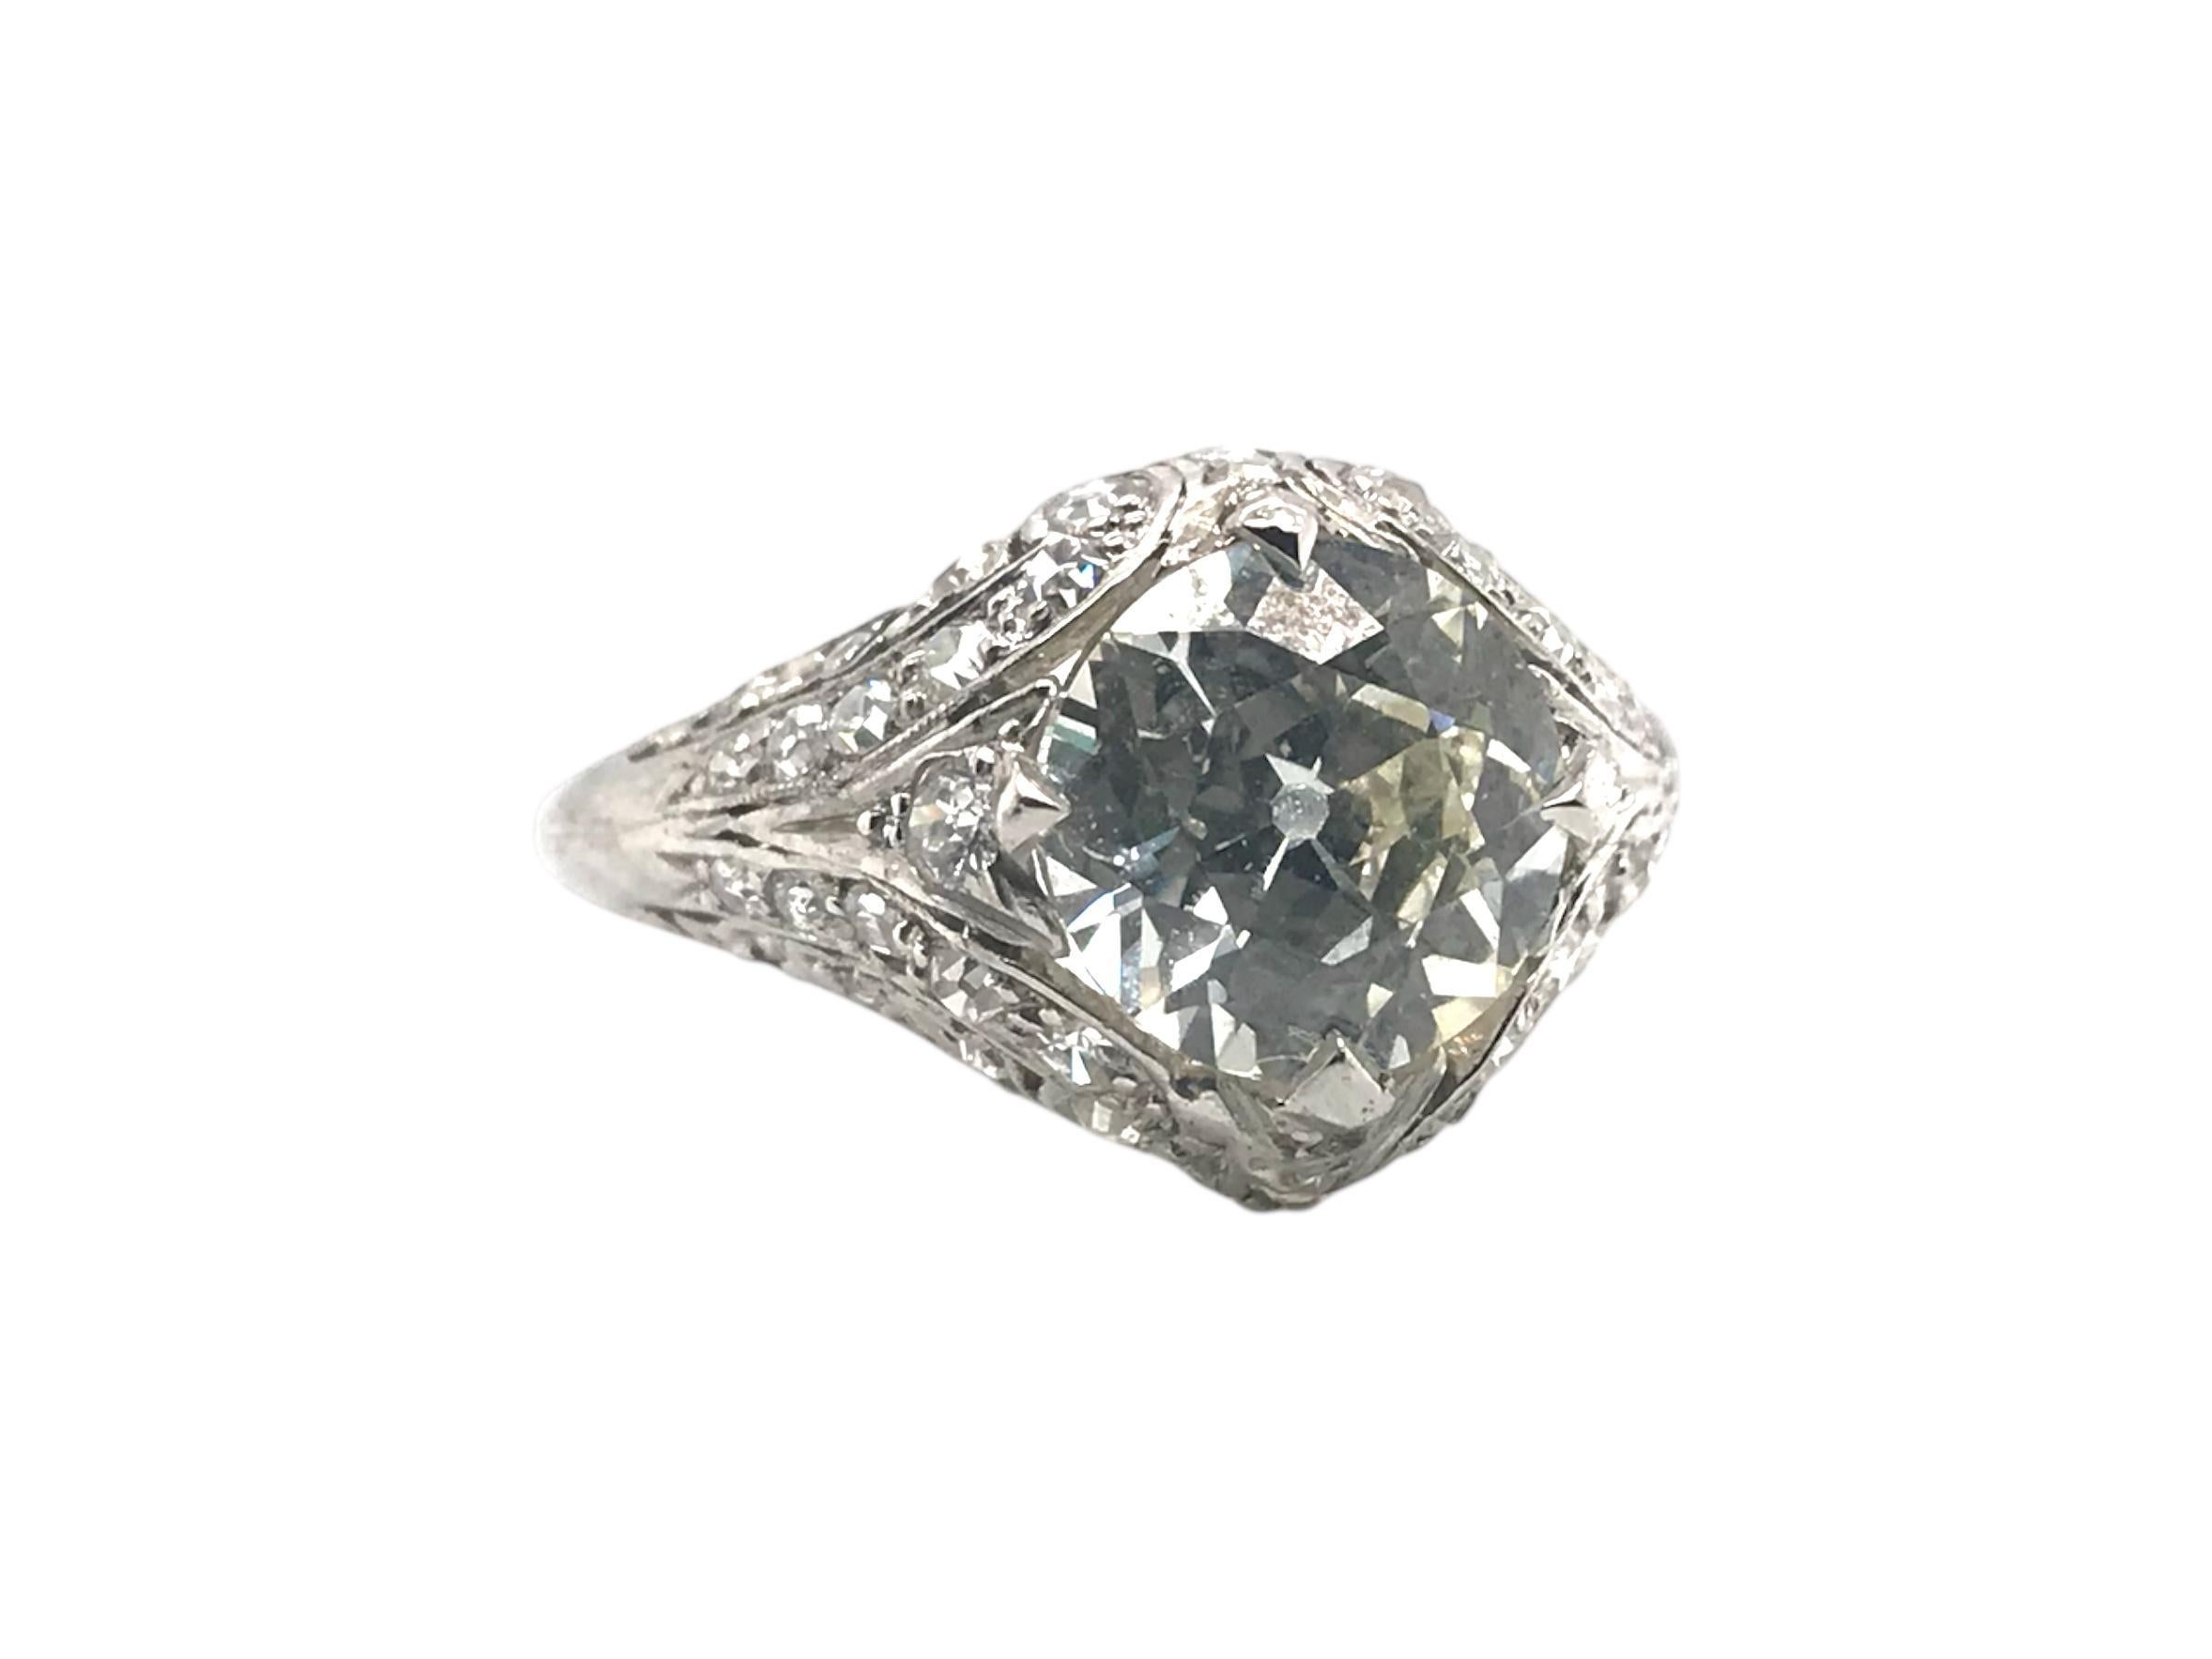 We love every detail about this vintage beauty!

Diamond Details:
Cut: Old European
WeightL 2.02 Carat
Color: M
Clarity: VS2 
Dimensions: 8.09mm X 8.17mm X 4.44mm 
GIA: 5222905031; Laser Inscribed 
40 - Single Cut Diamonds 1.0mm - 1.4mm
2 - 2.0mm